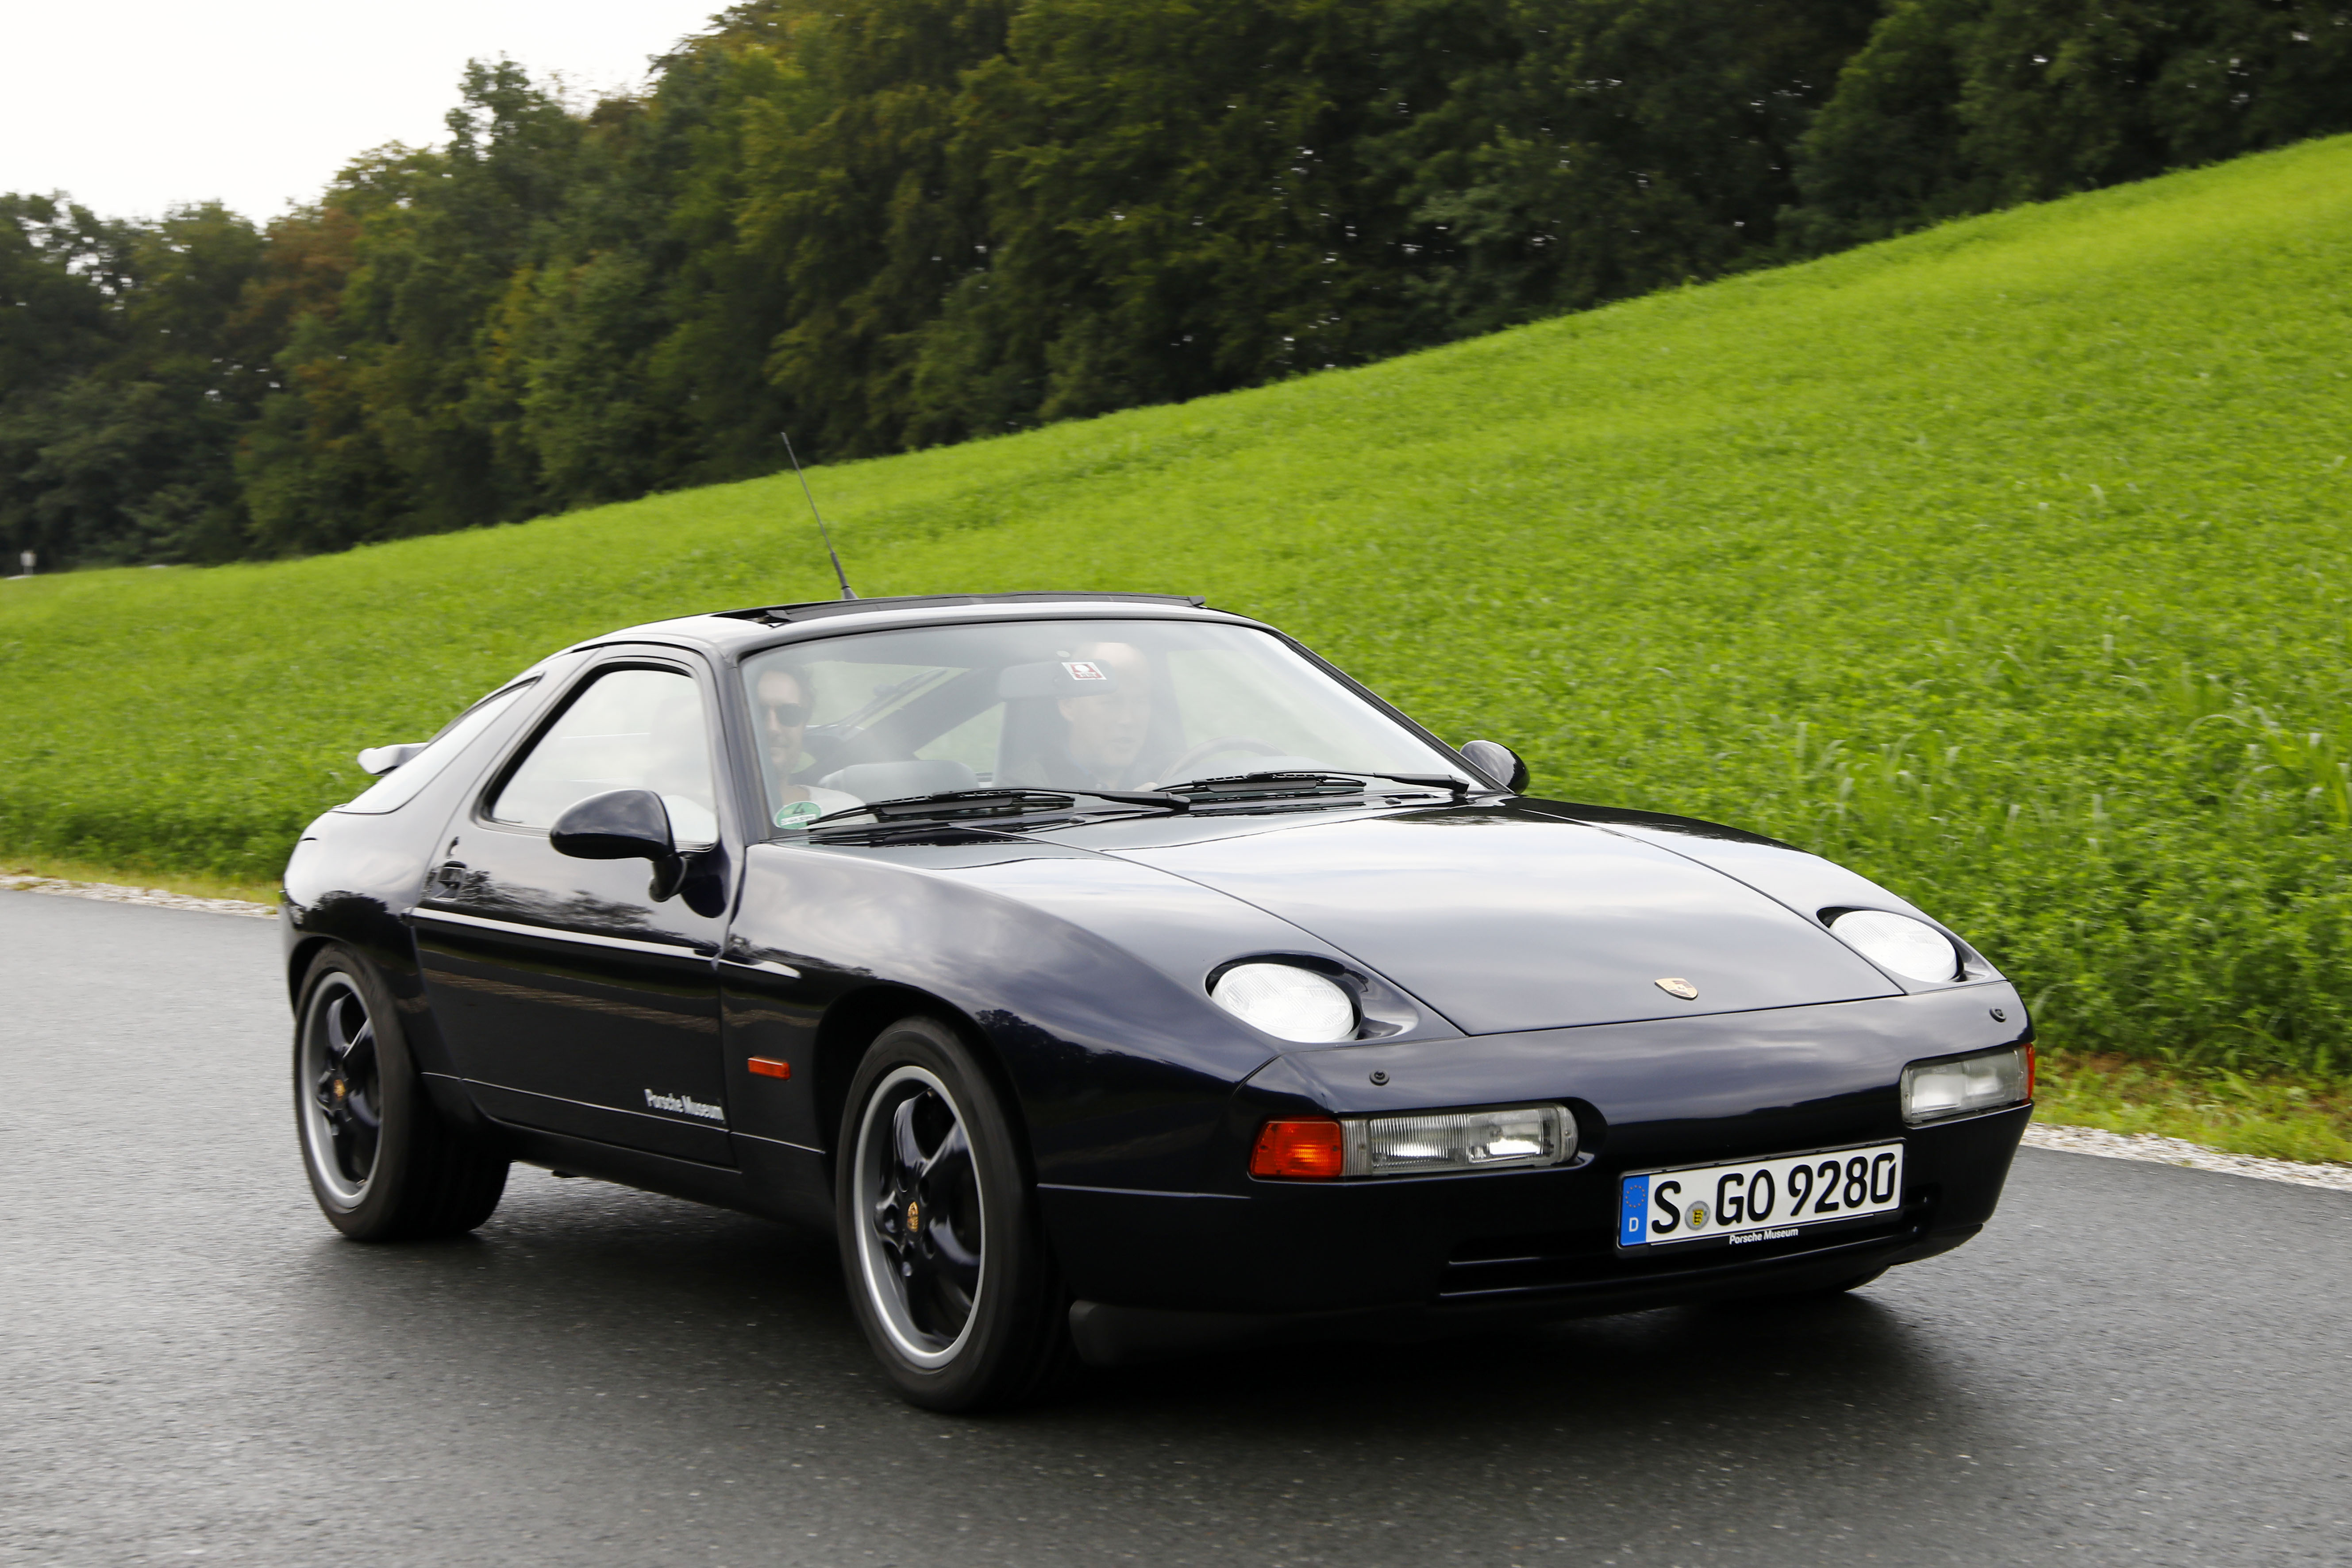 Porsche 928 GTS on wet road in countryside